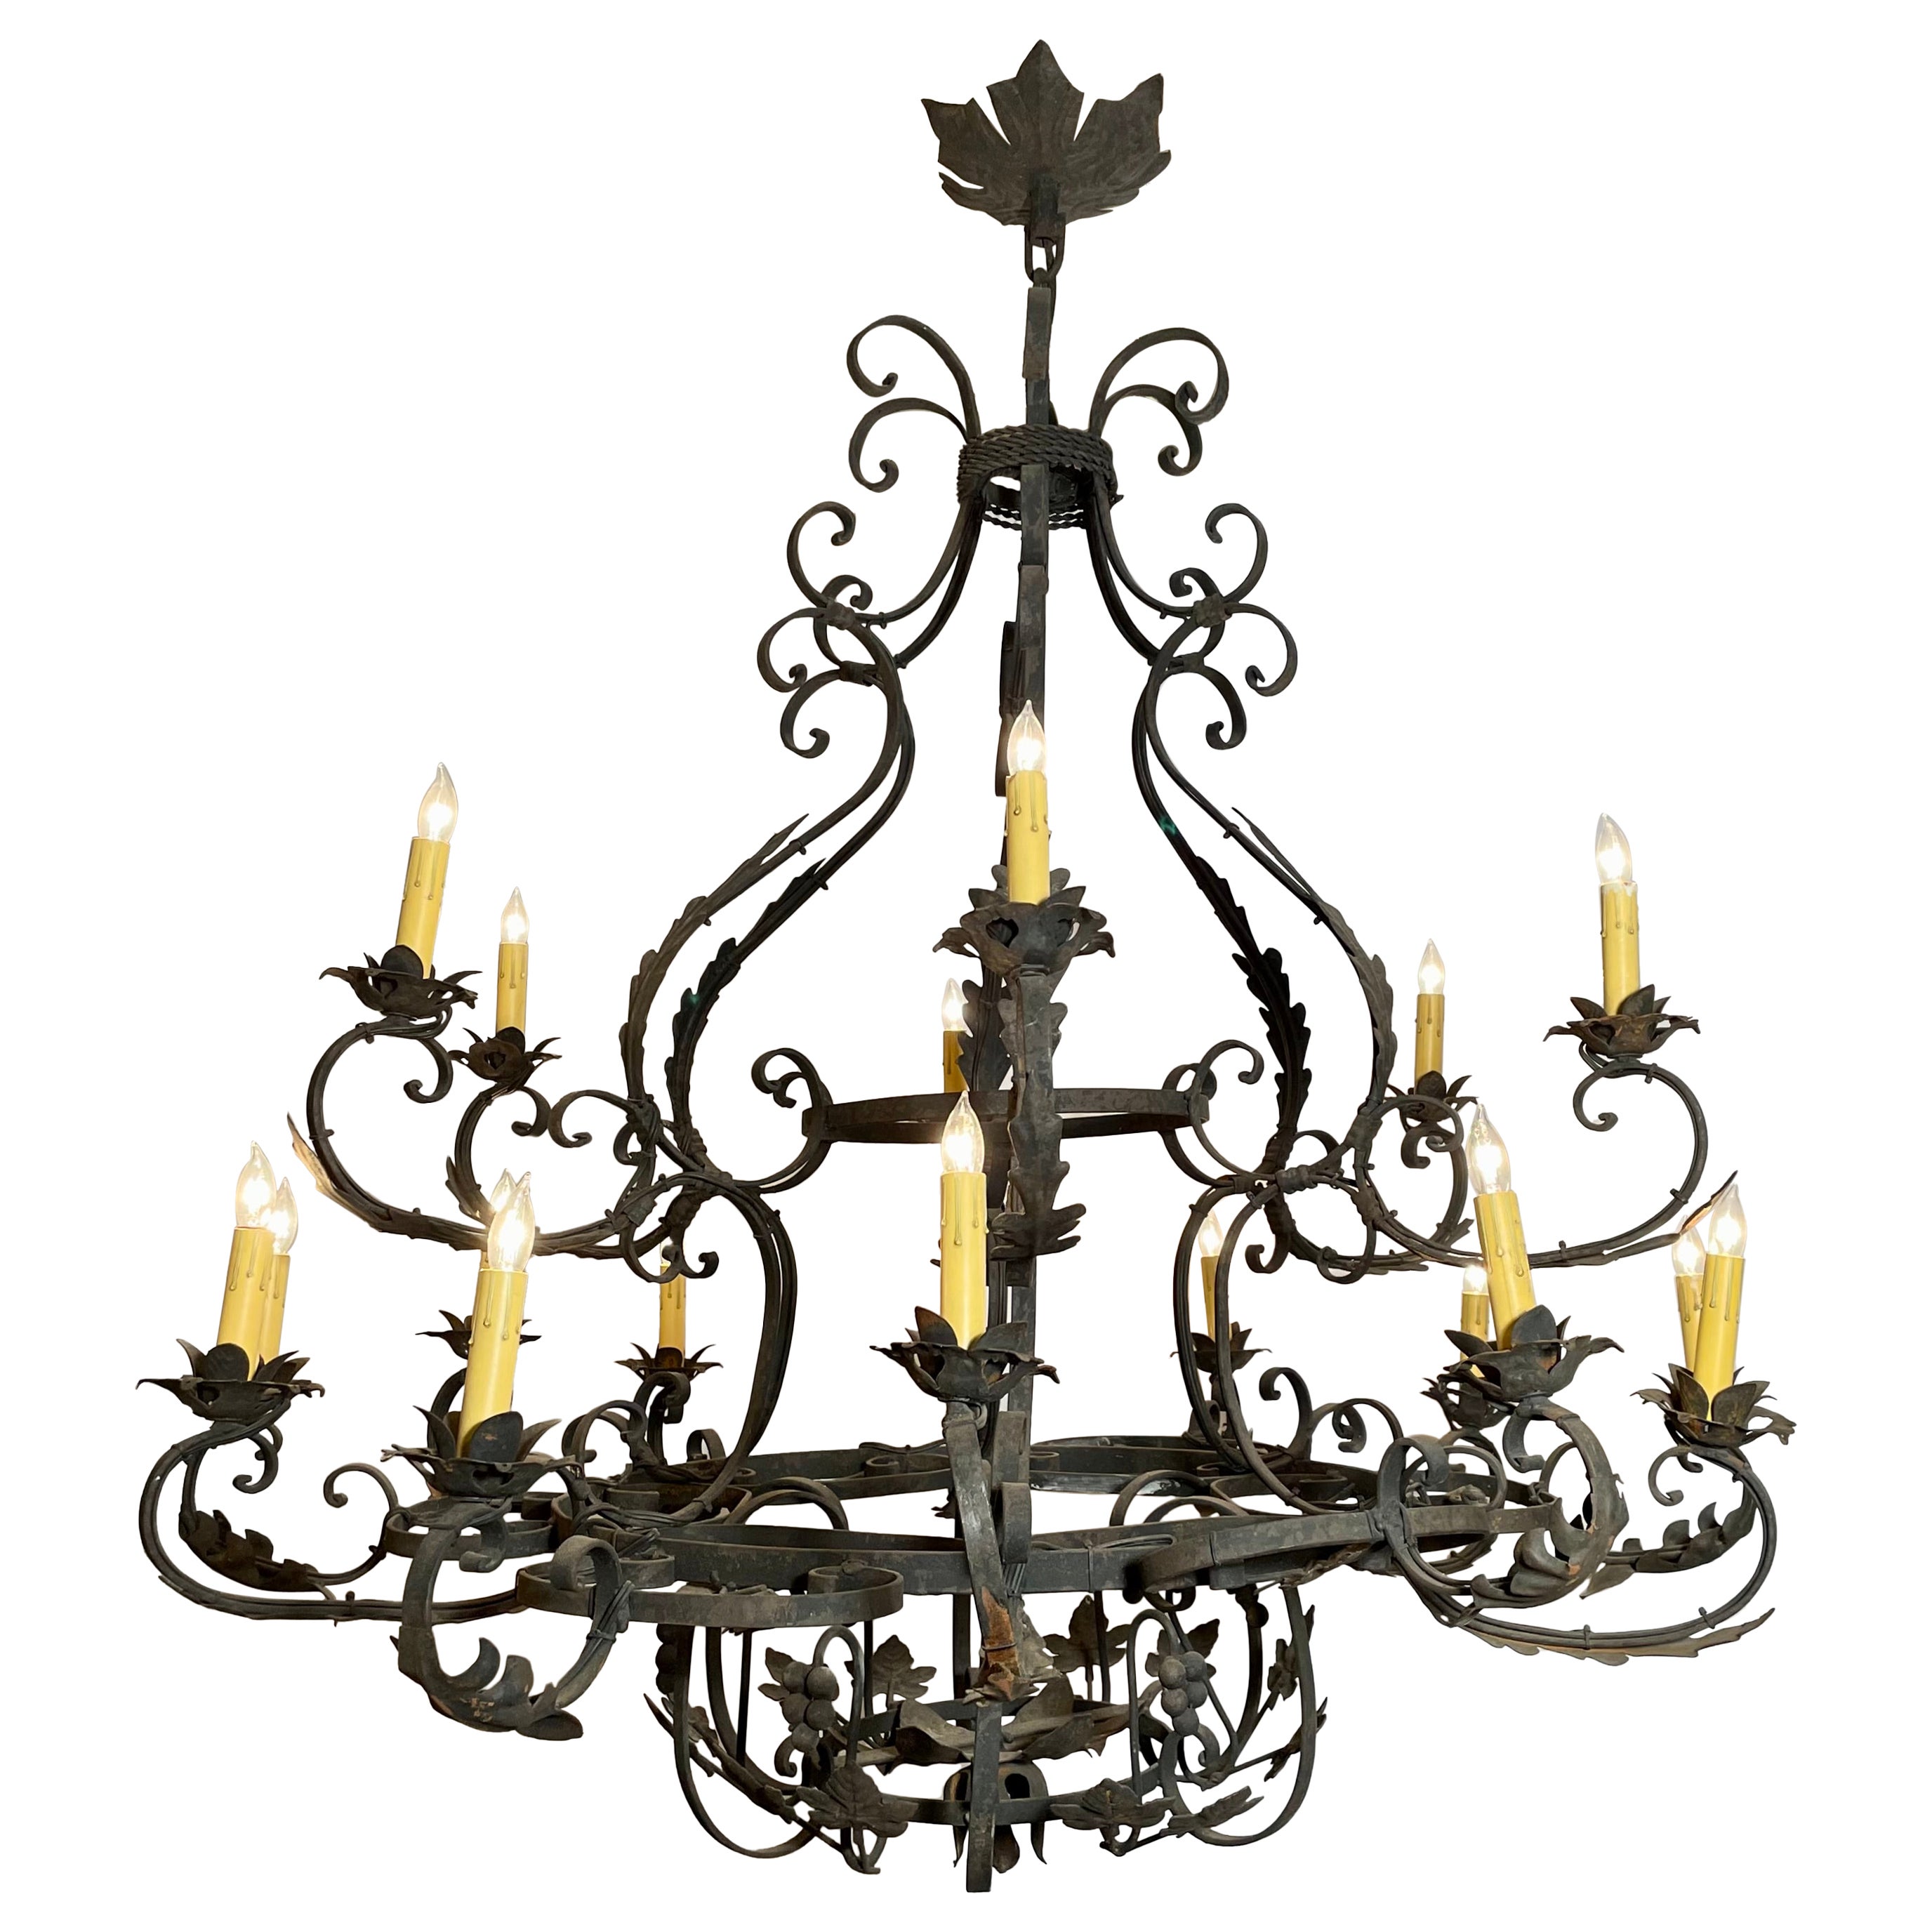 Large Wrought Iron Chandelier circa 1950s